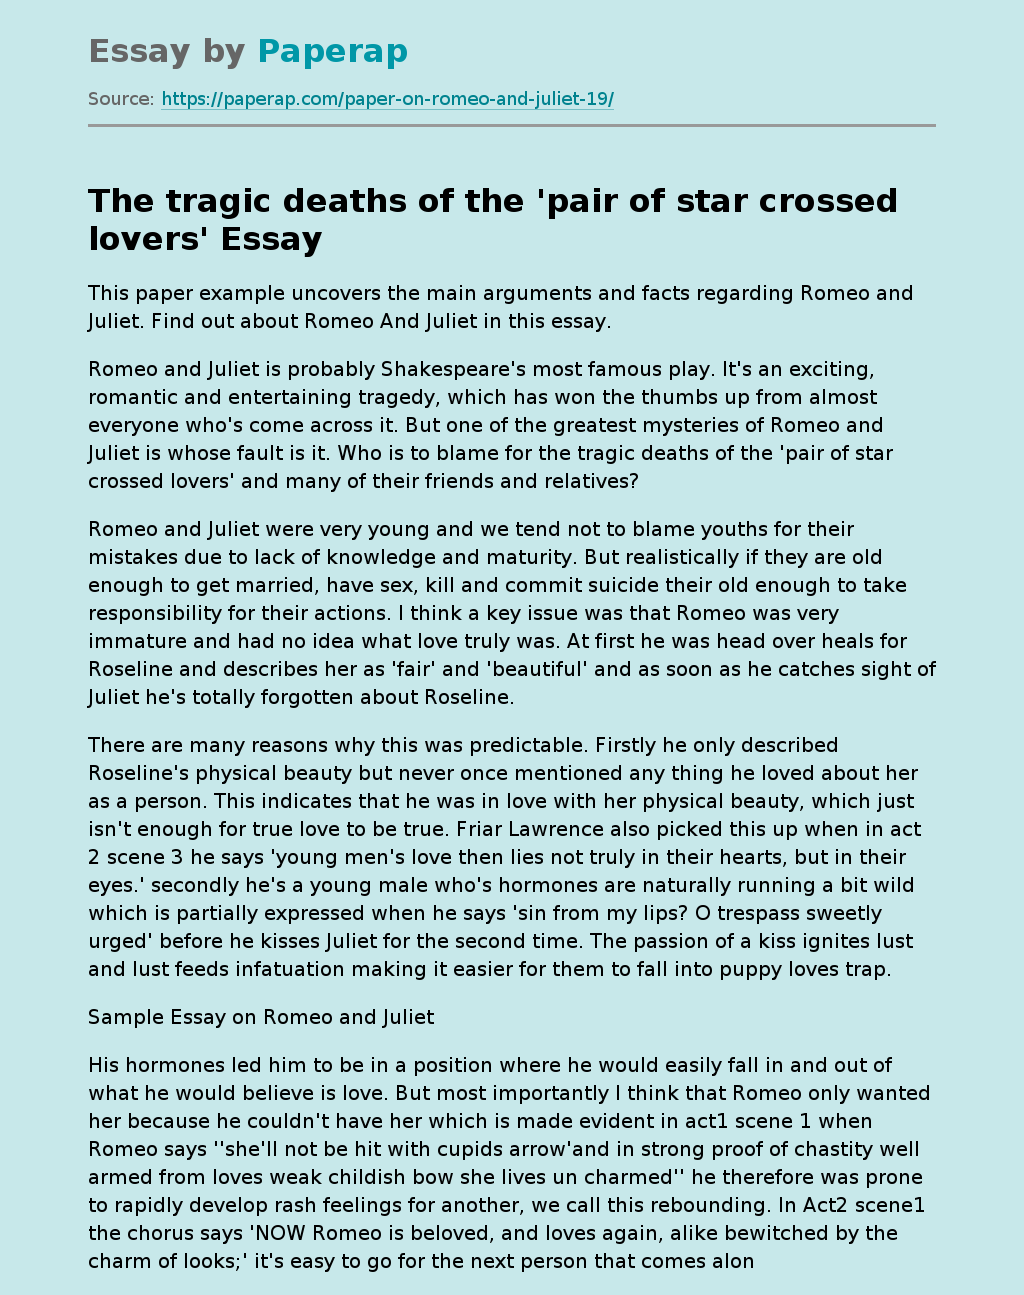 The Tragic Deaths Of The 'Pair Of Star Crossed Lovers'